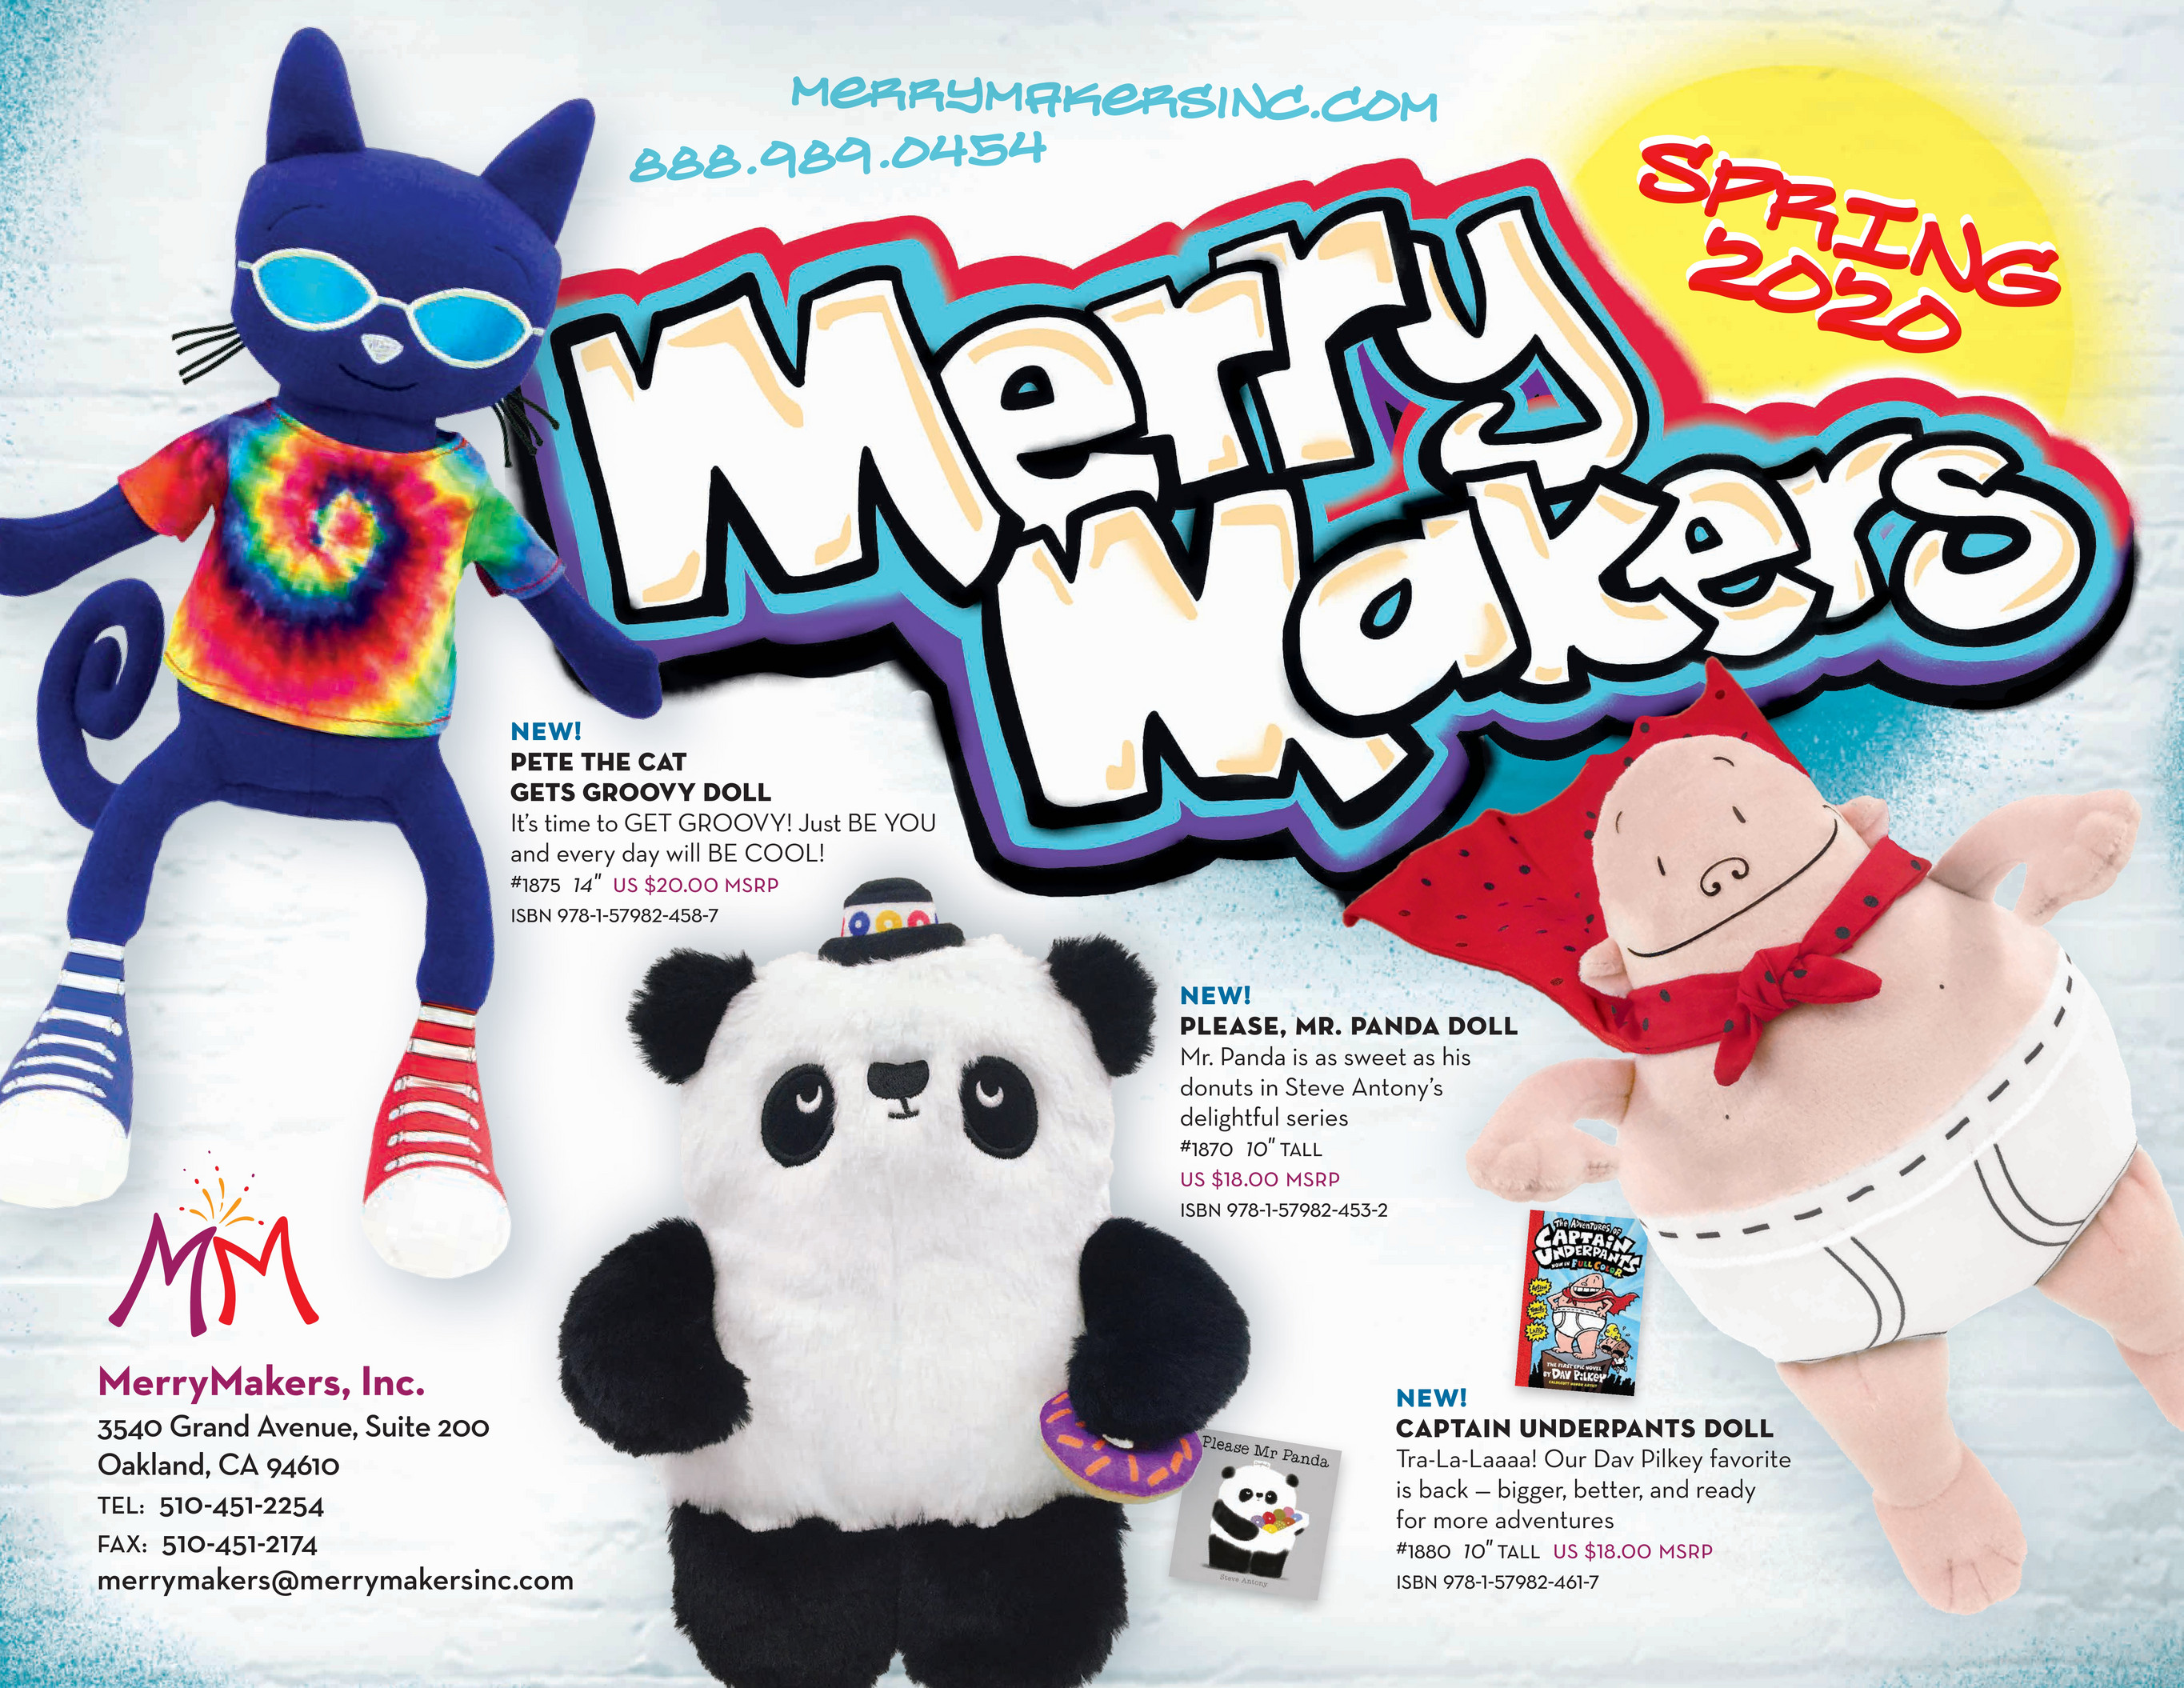 MerryMakers - 2019-2020 MerryMakers Catalog - Page 8-9